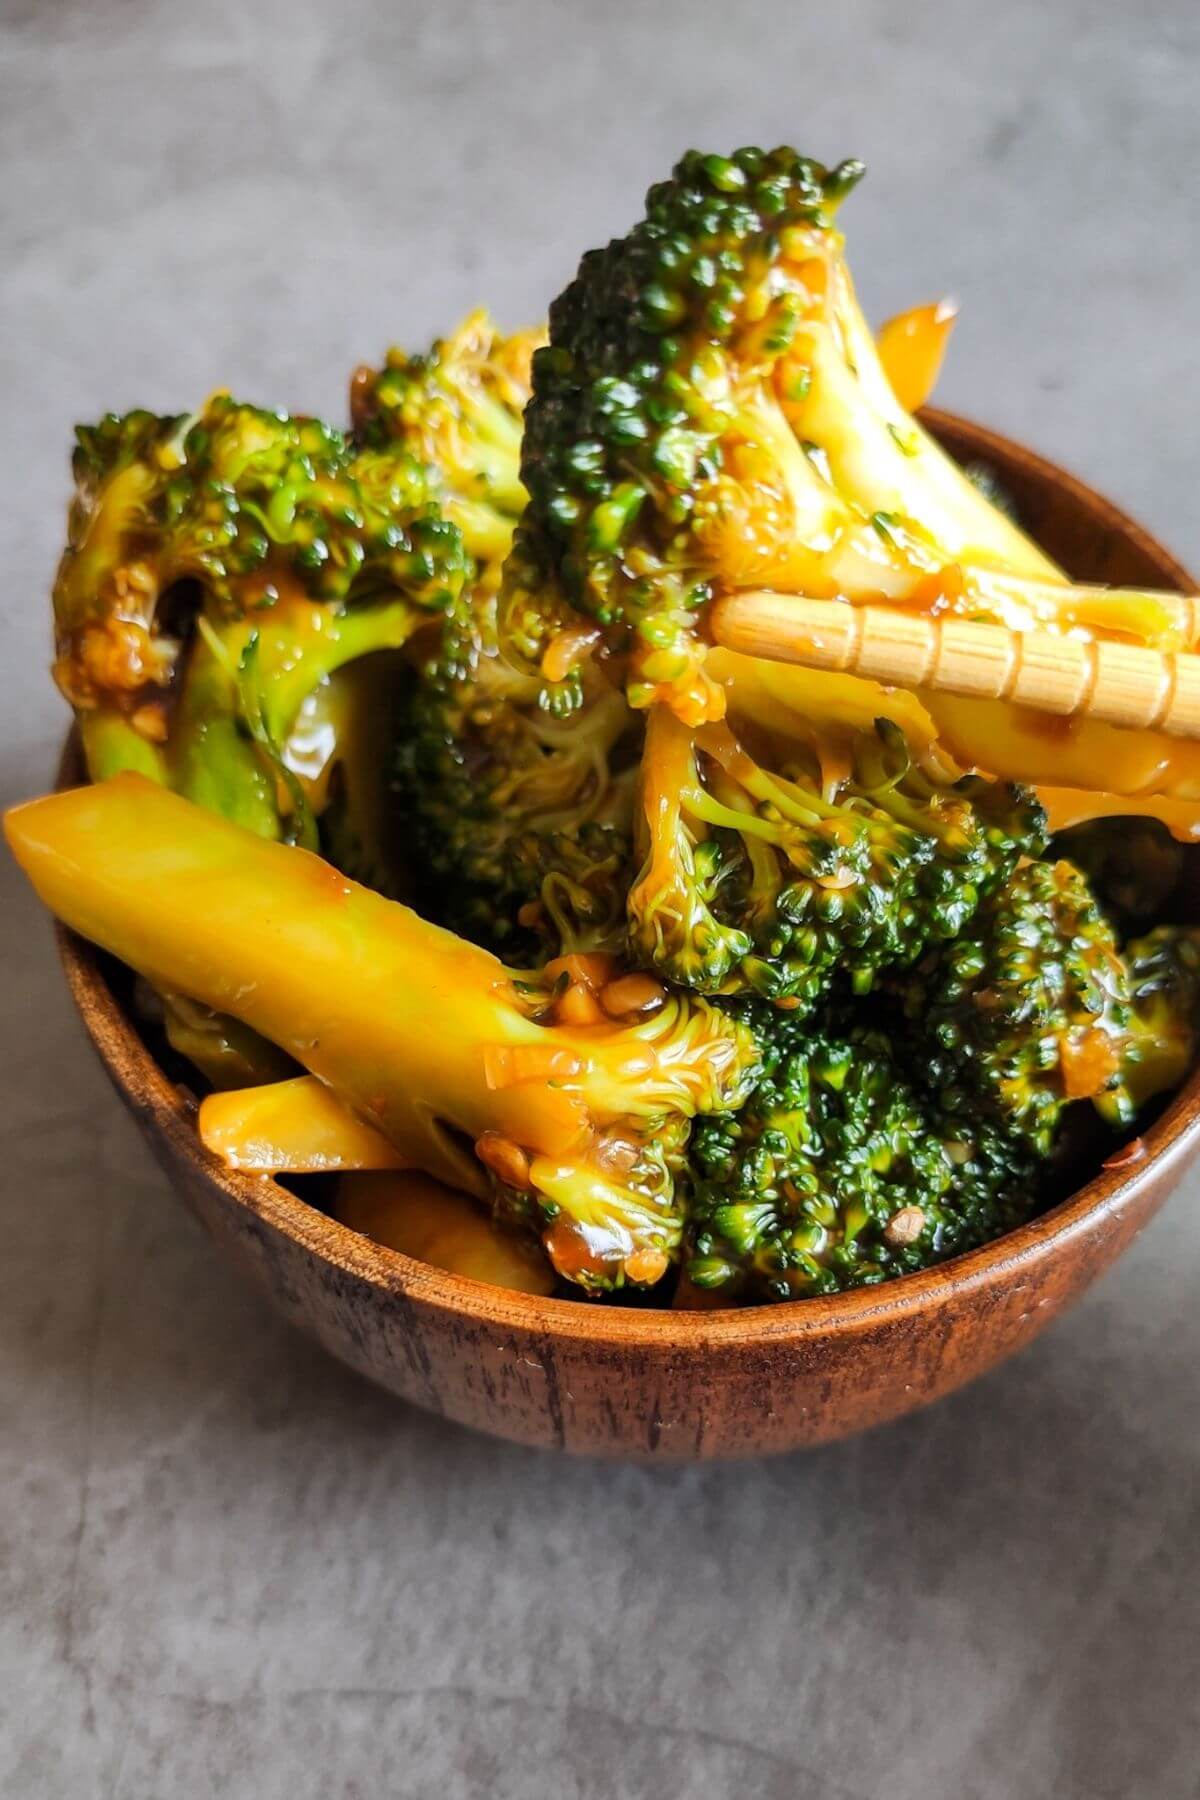 Asian garlic broccoli getting lifted with a pair of chopsticks from a wooden bowl of the dish